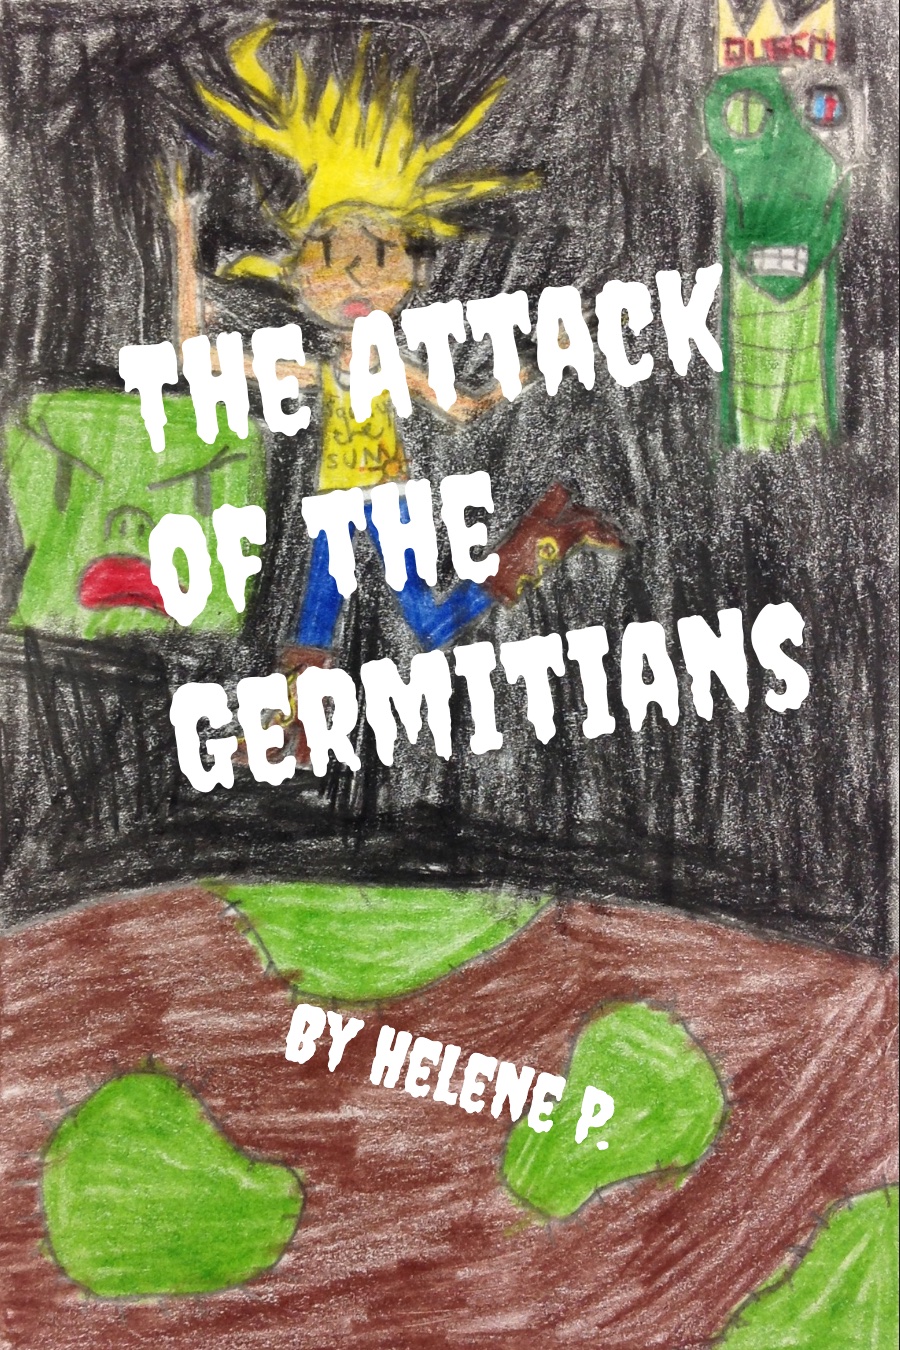 The Attack of the Germitians by Helene P